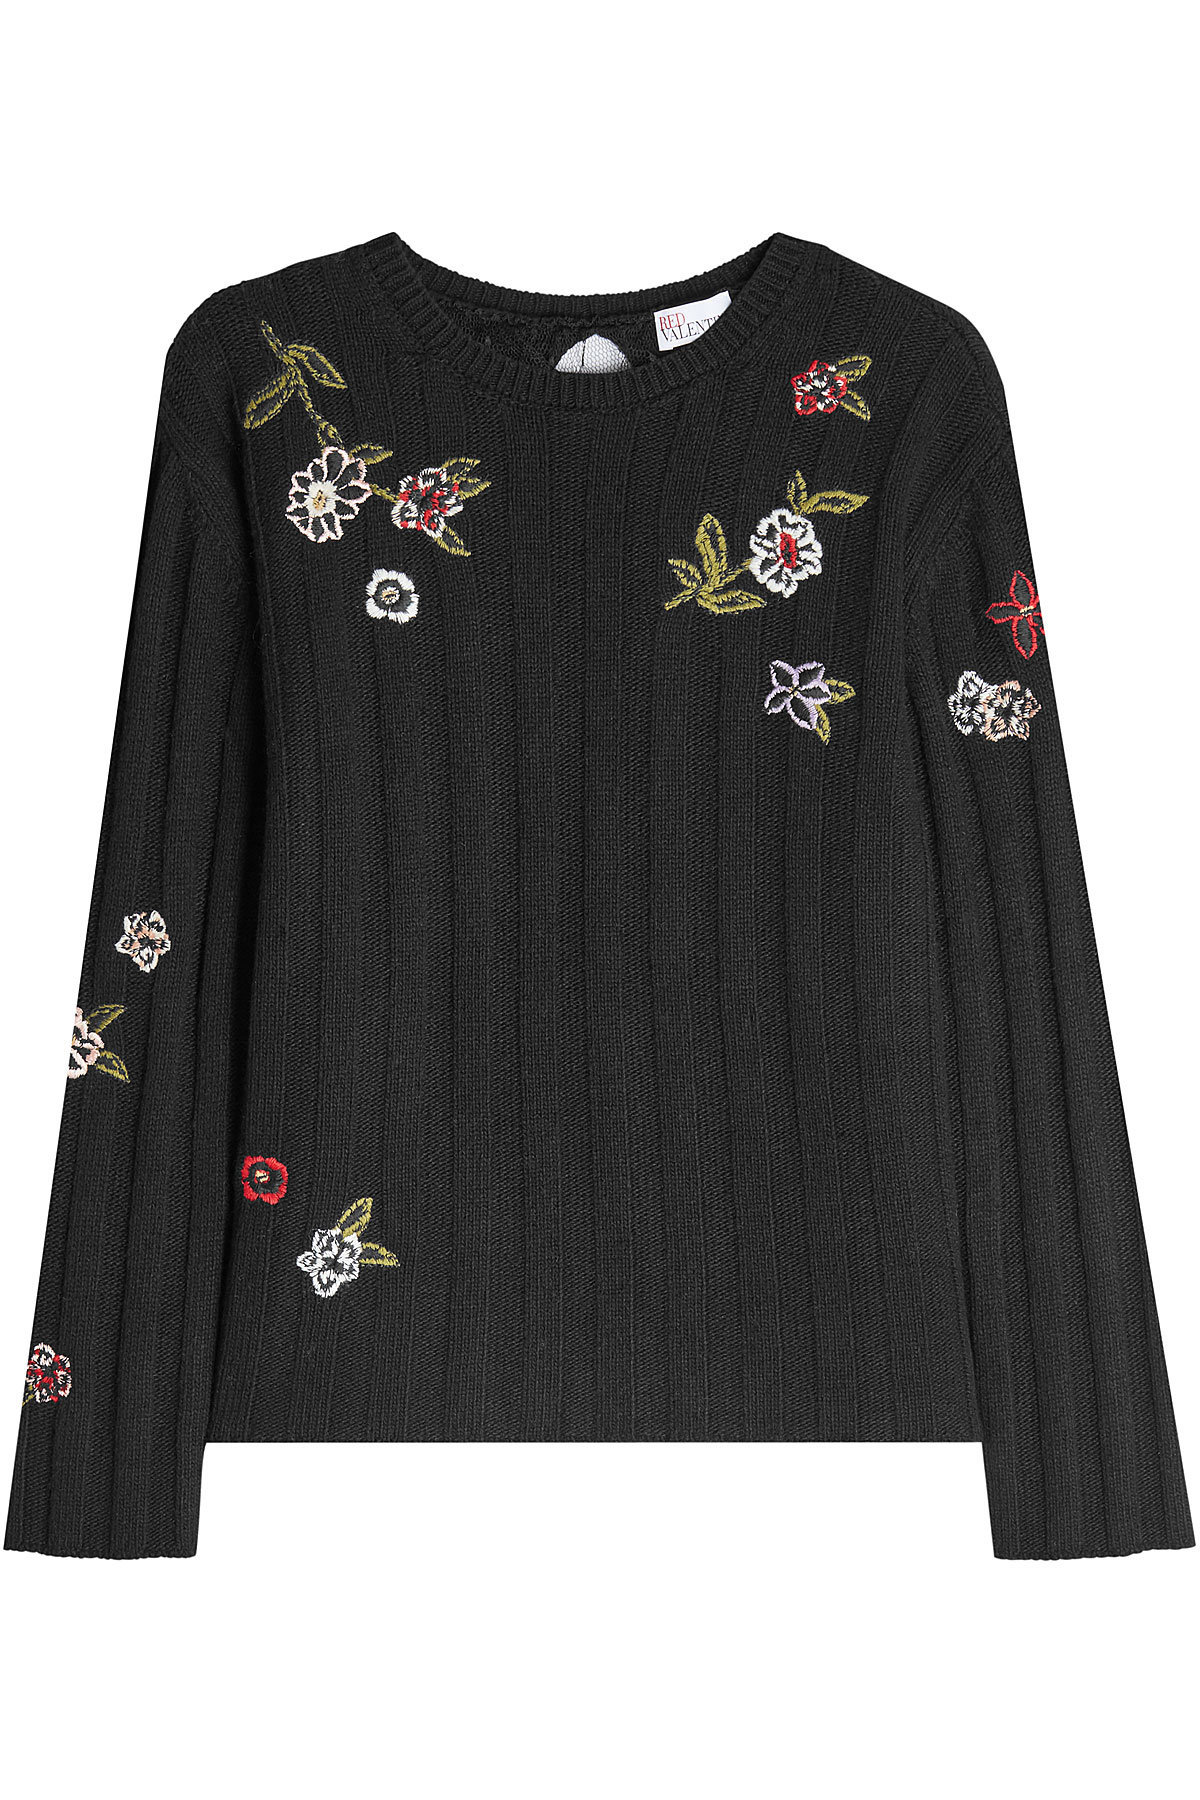 Red Valentino - Embroidered Pullover with Lace